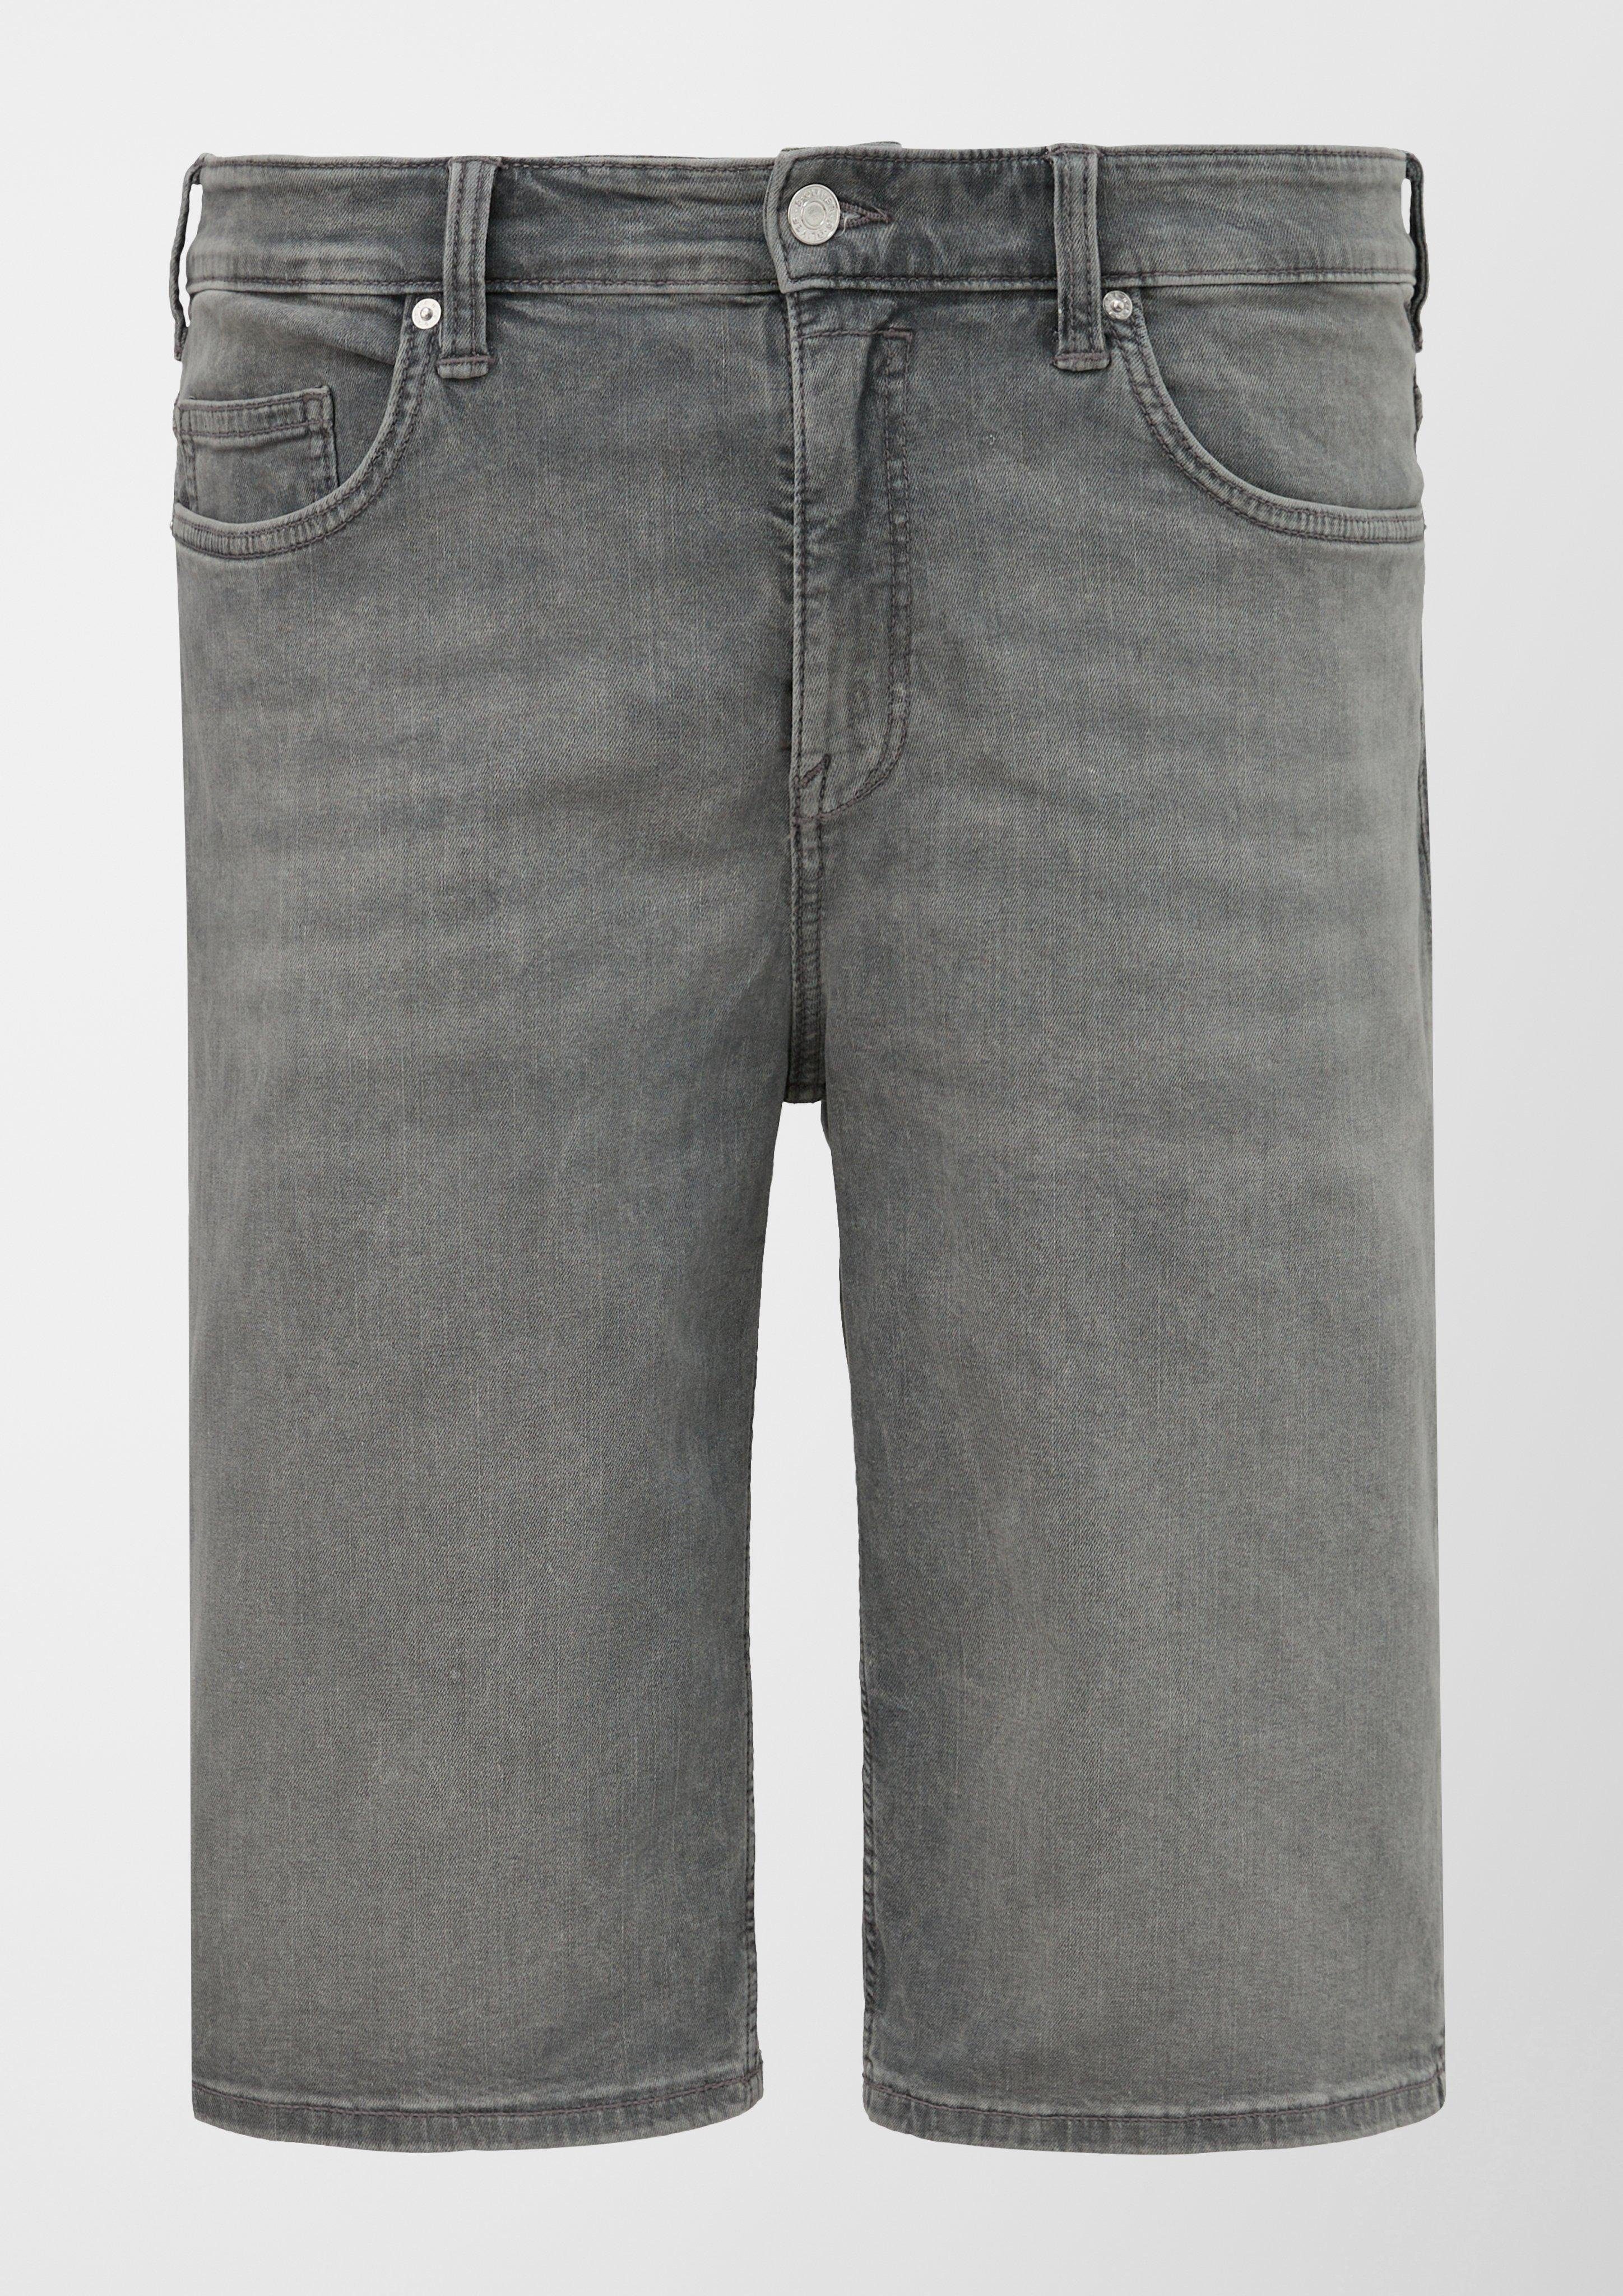 s.Oliver Jeansshorts Jeans-Bermuda Casby / / Fit steingrau Relaxed Straight Mid Rise Waschung / Leg